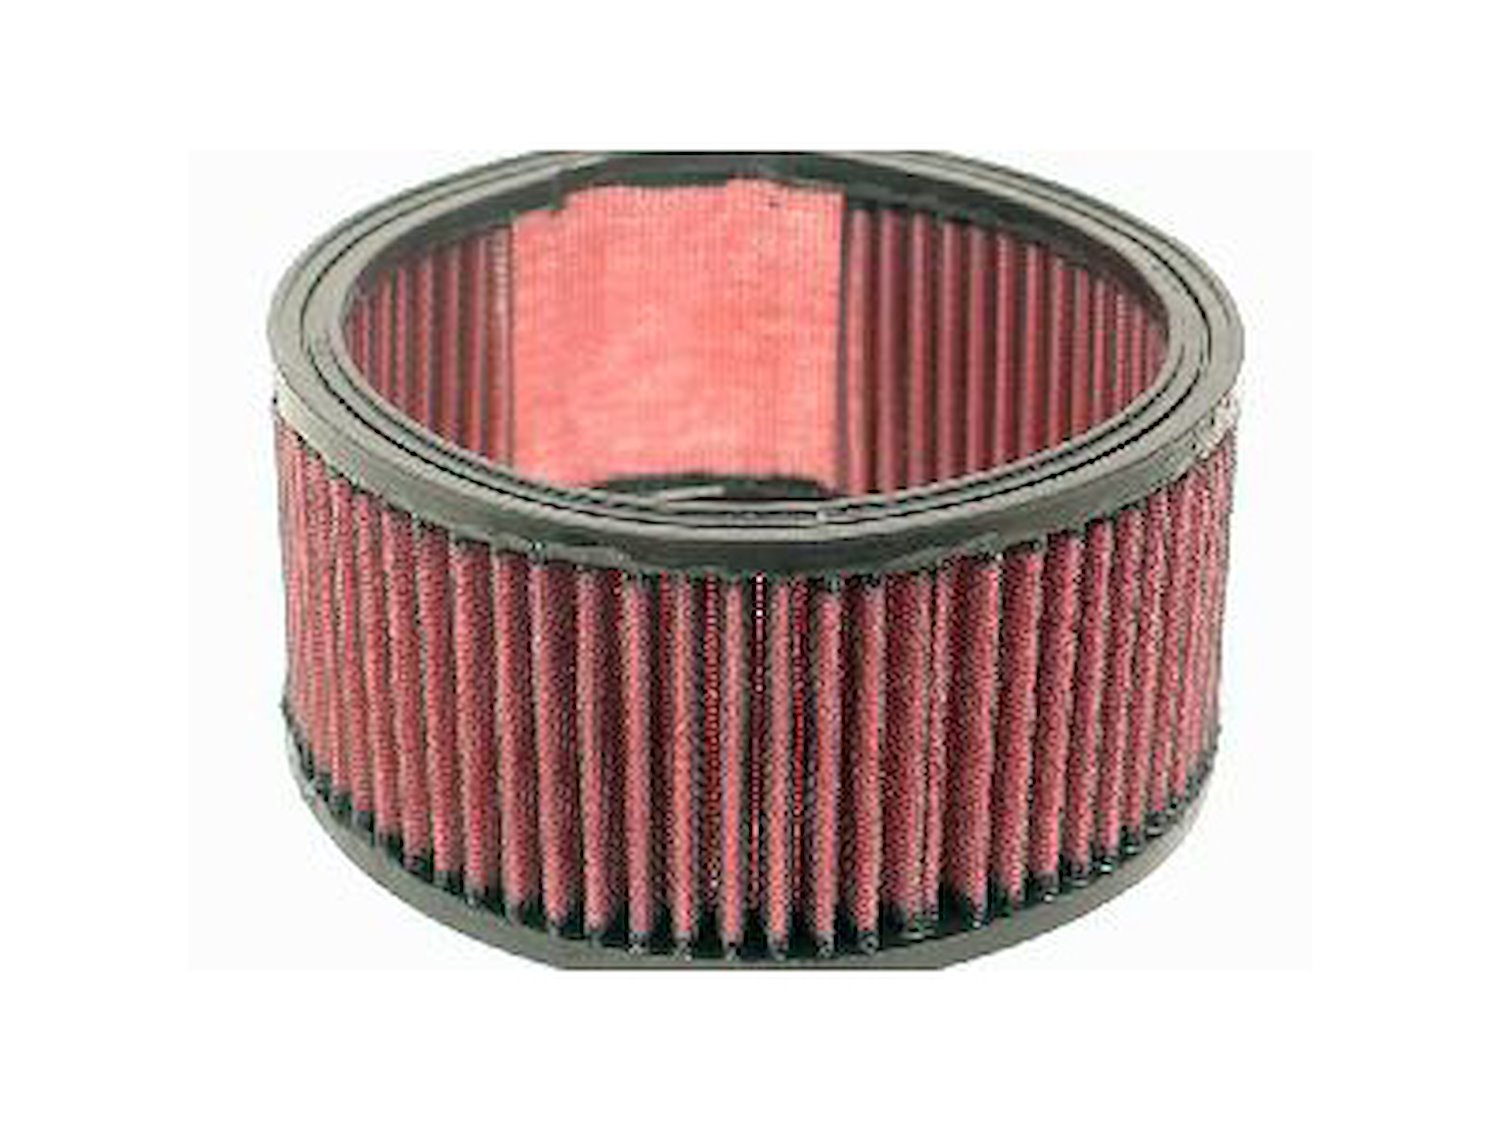 Custom Air Filter Elements Filter Style: Down Draft Oval